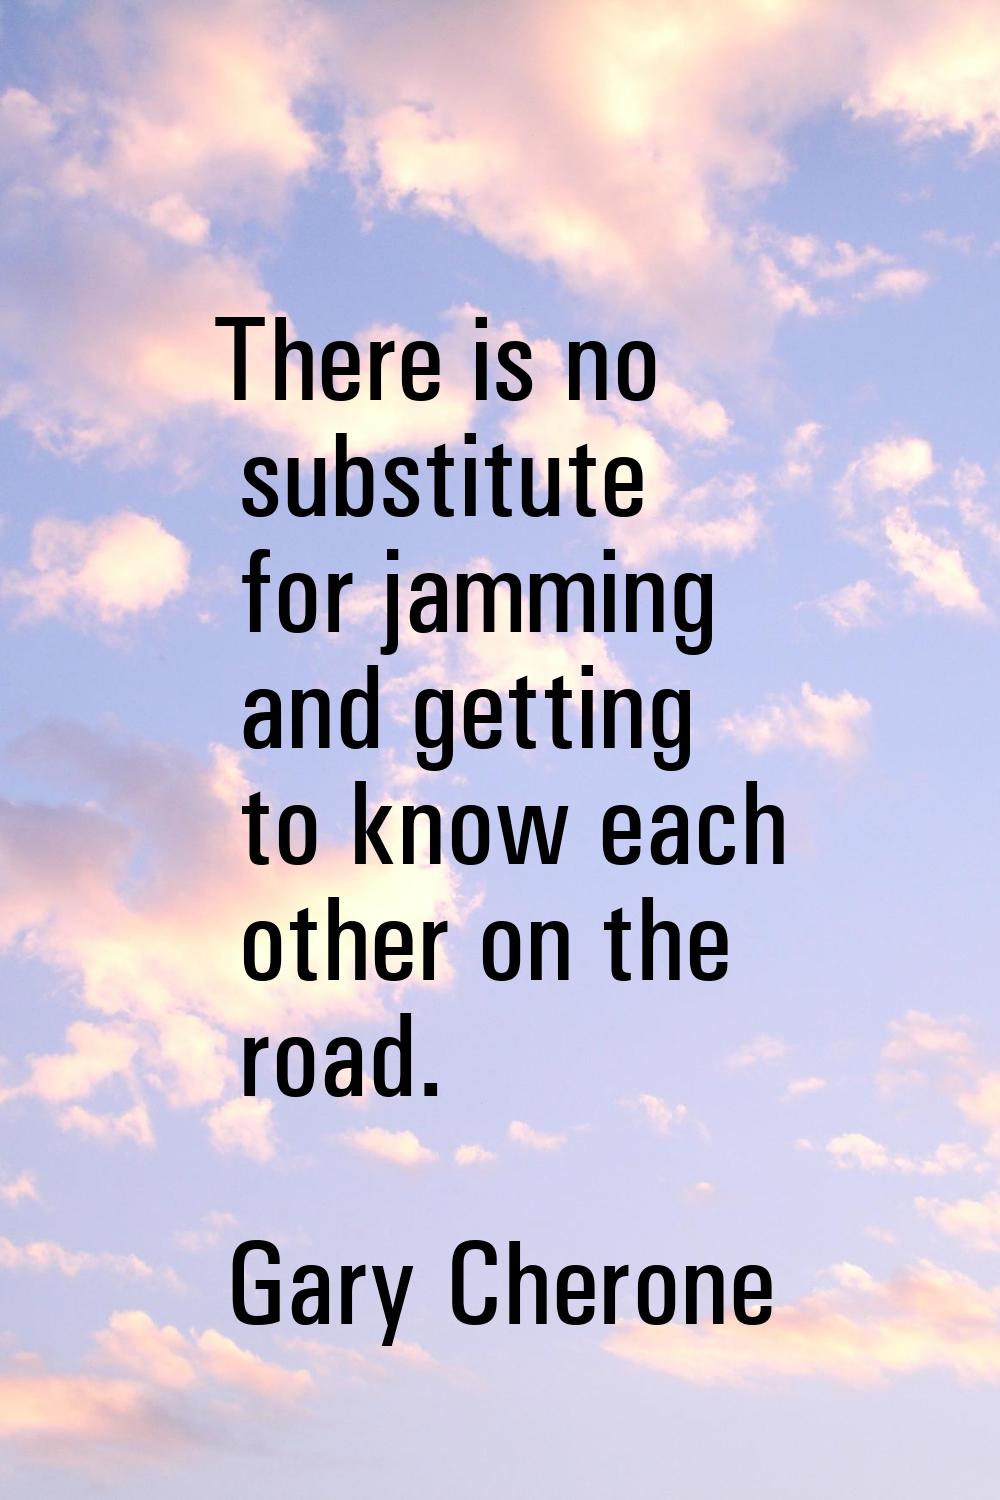 There is no substitute for jamming and getting to know each other on the road.